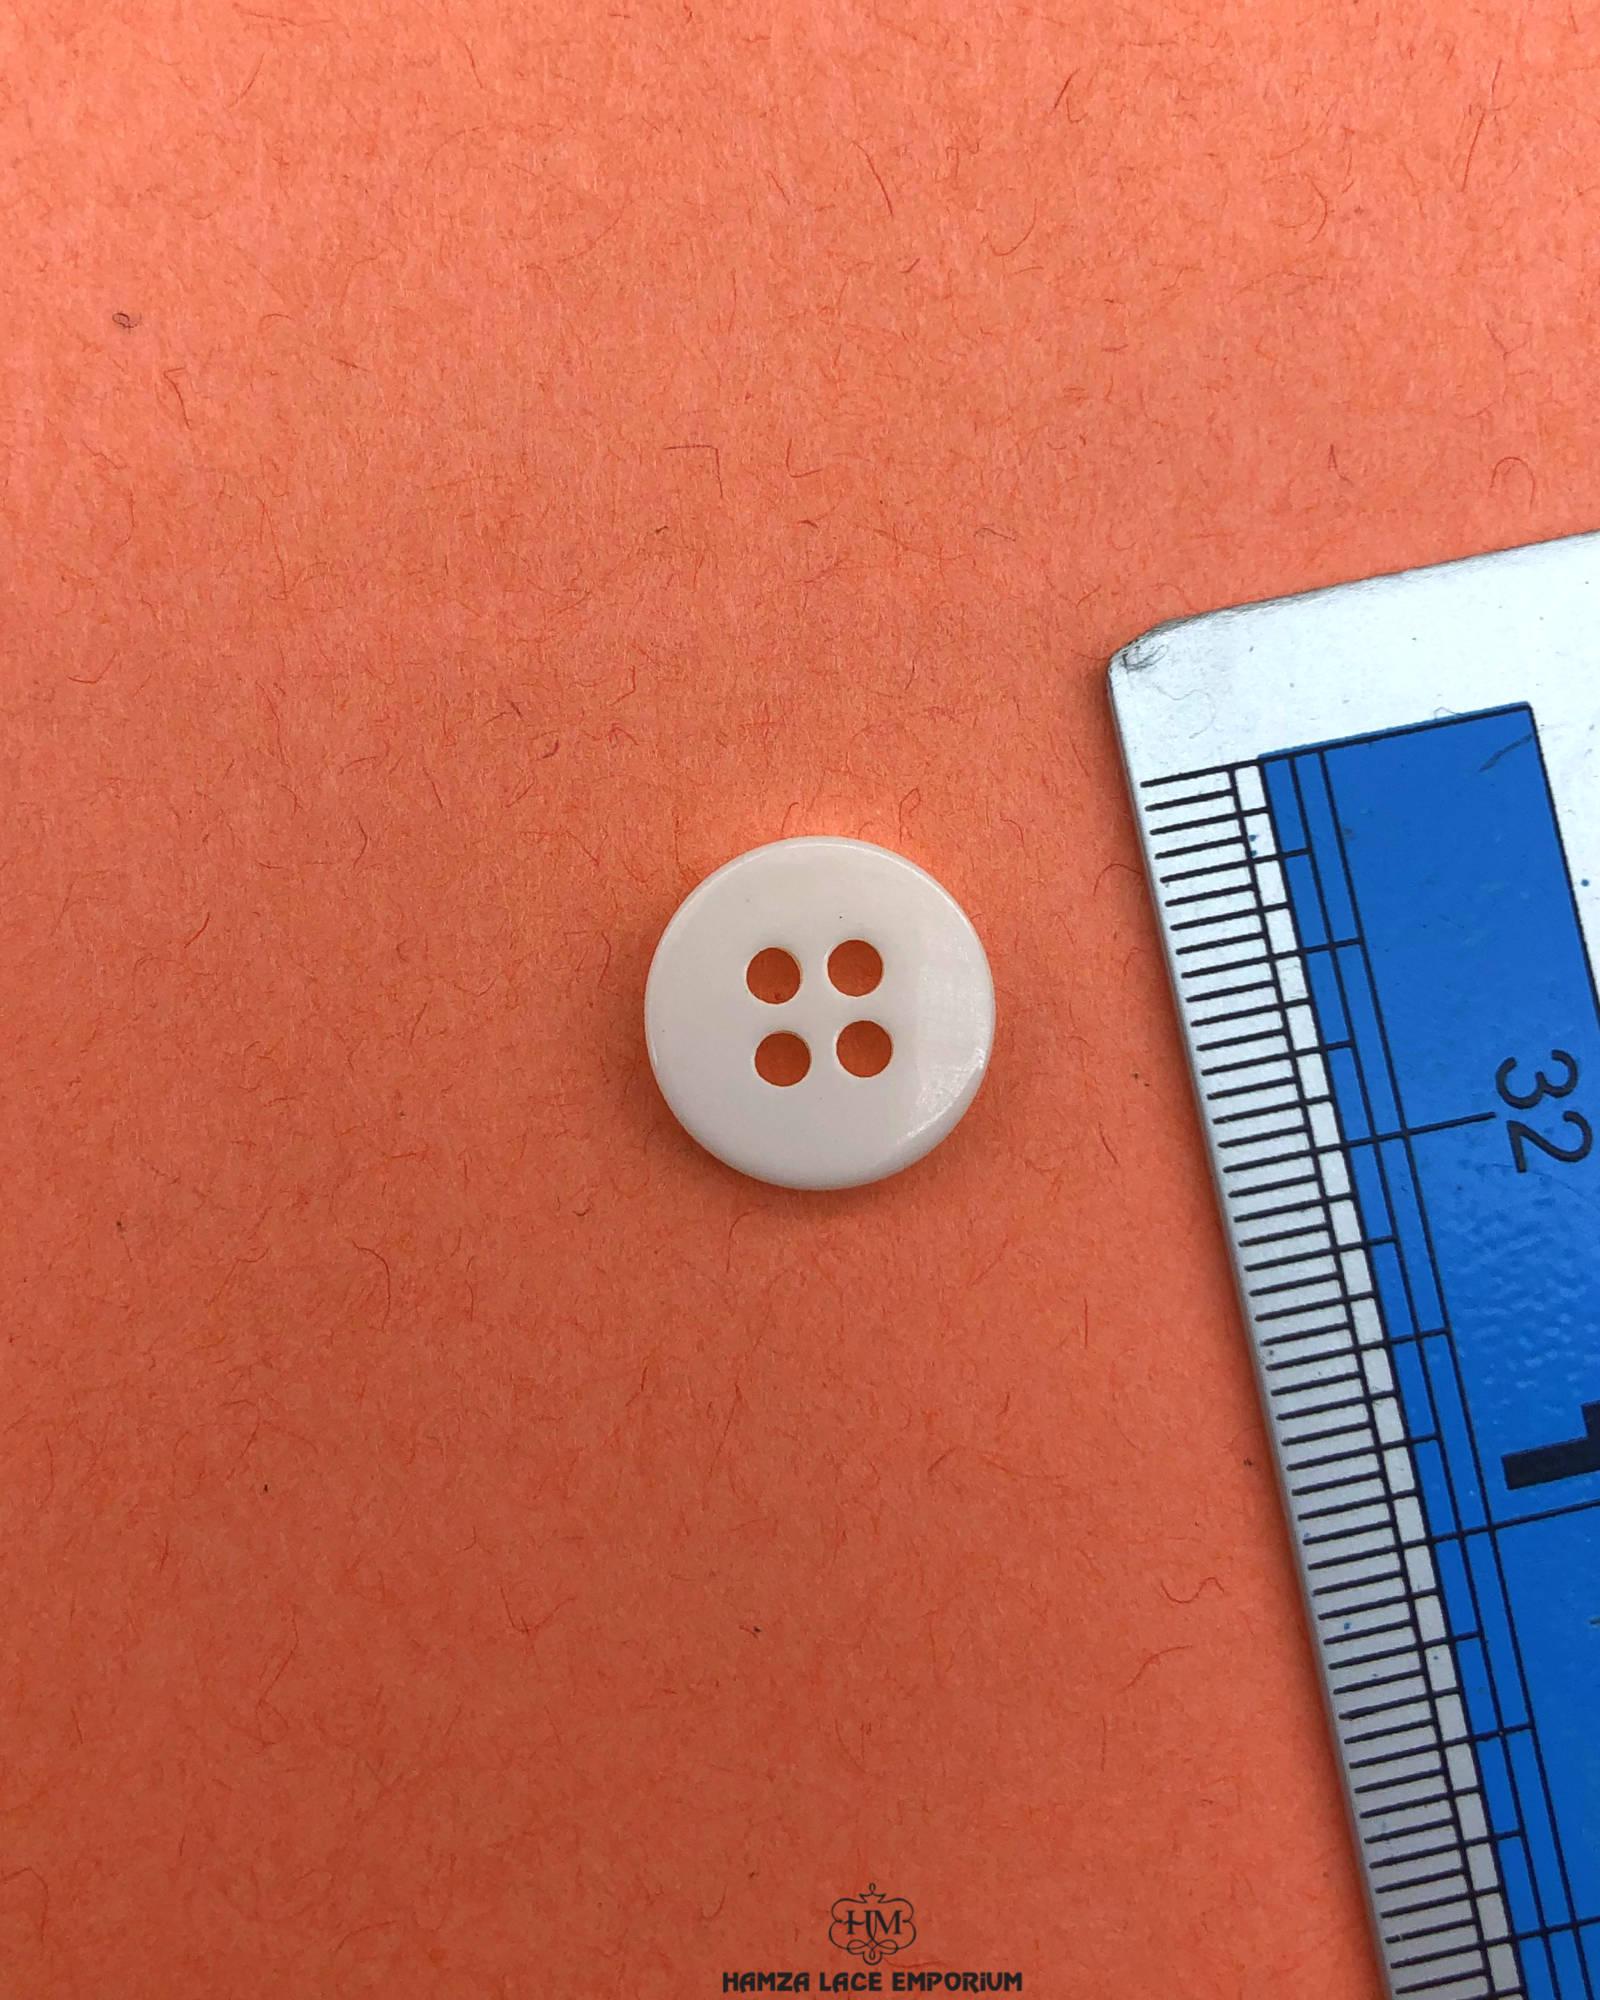 The size of the Beautifully designed 'Four Hole Plastic Button PB010' is measured by using a ruler